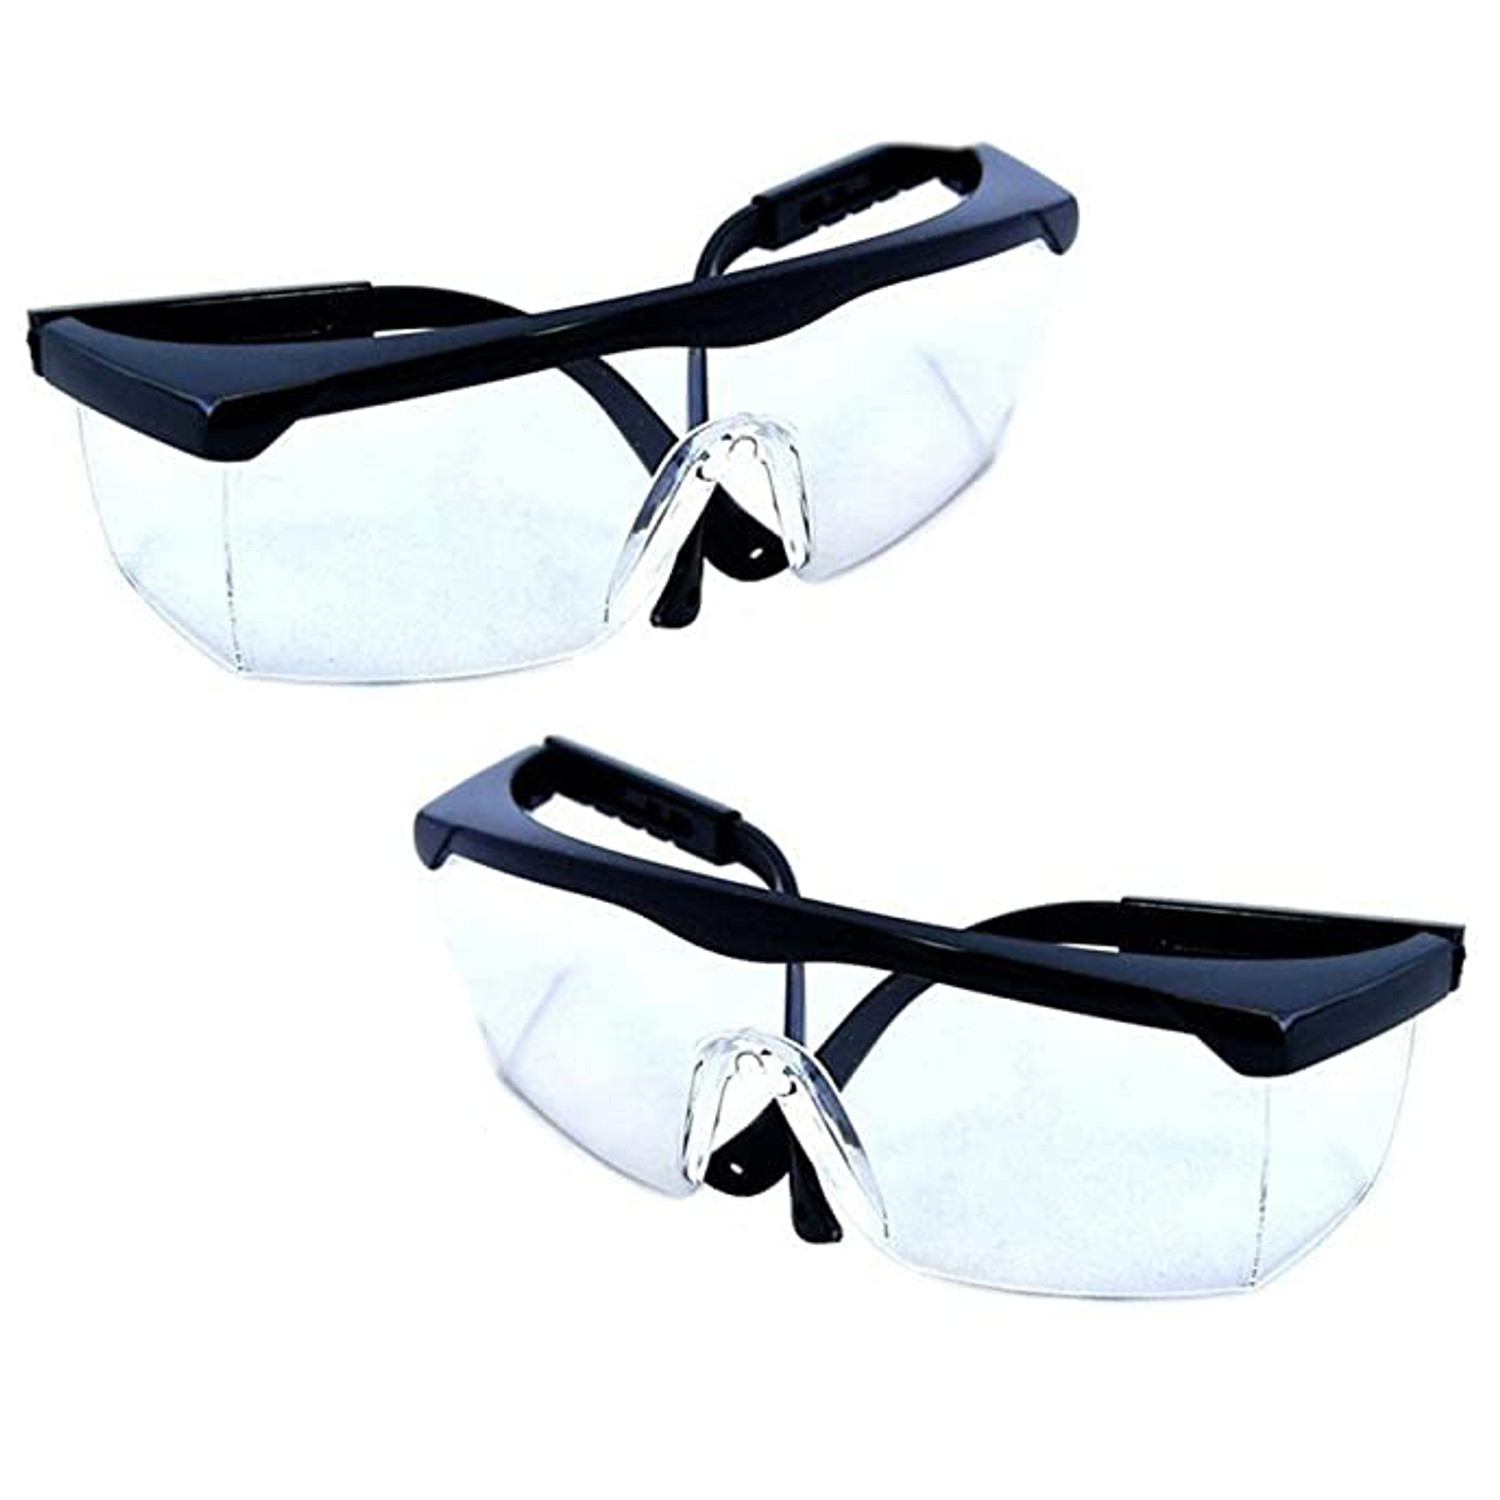 Hqrp 2 Pair Uv Protecting Glasses For Medical Dental Clinic Surgery Pathology Lab Dentists